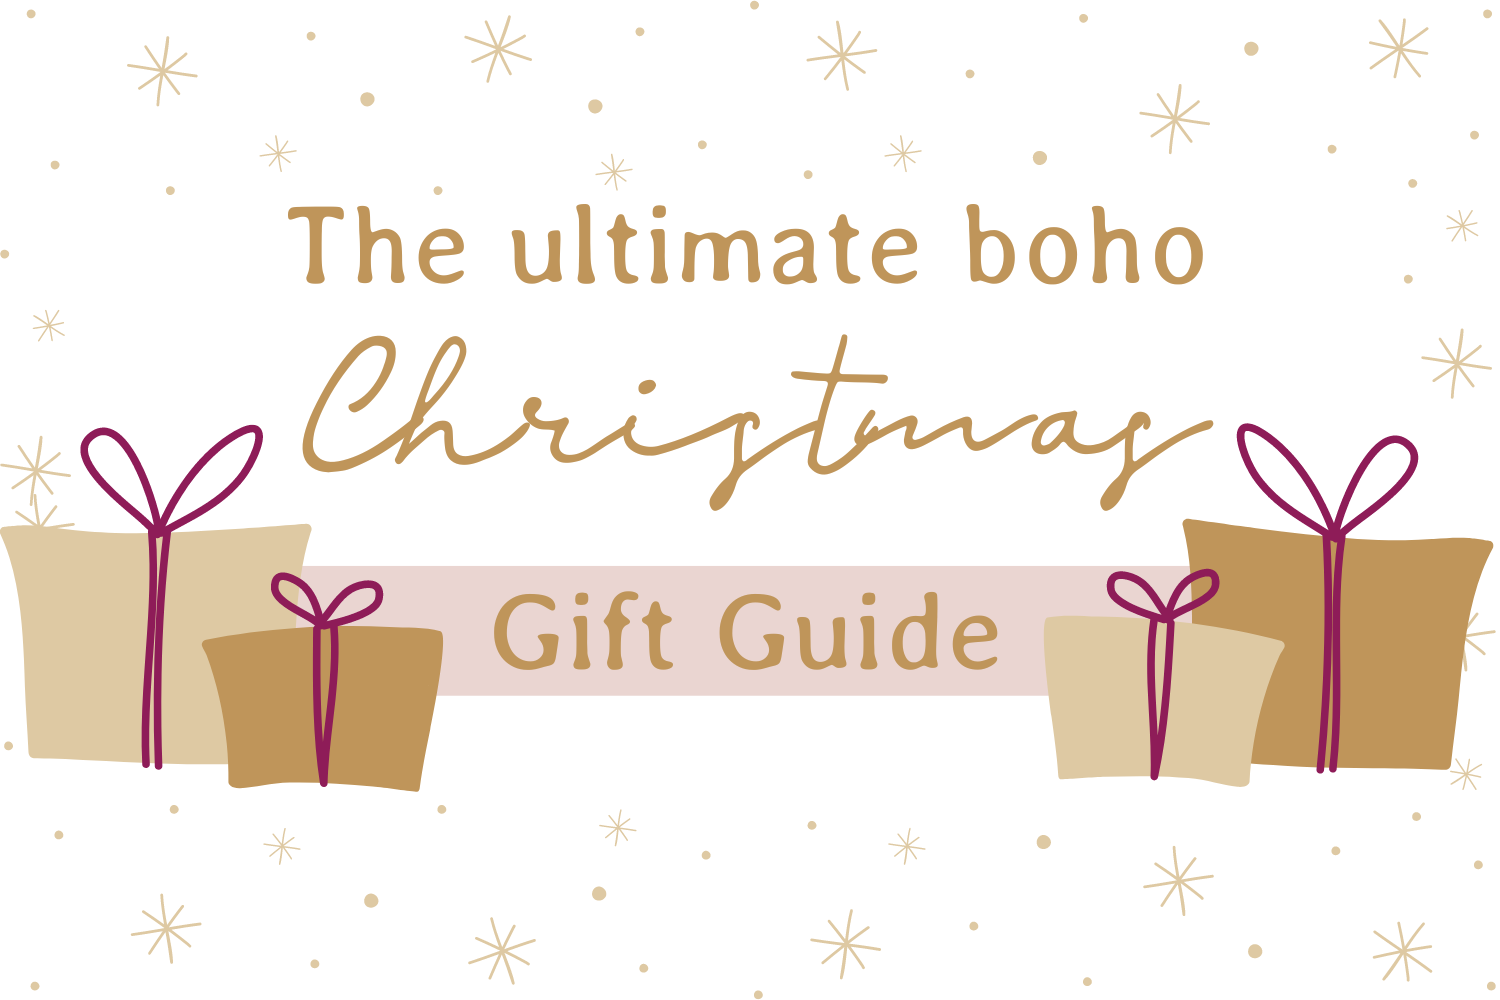 The 2022 Gift Guide